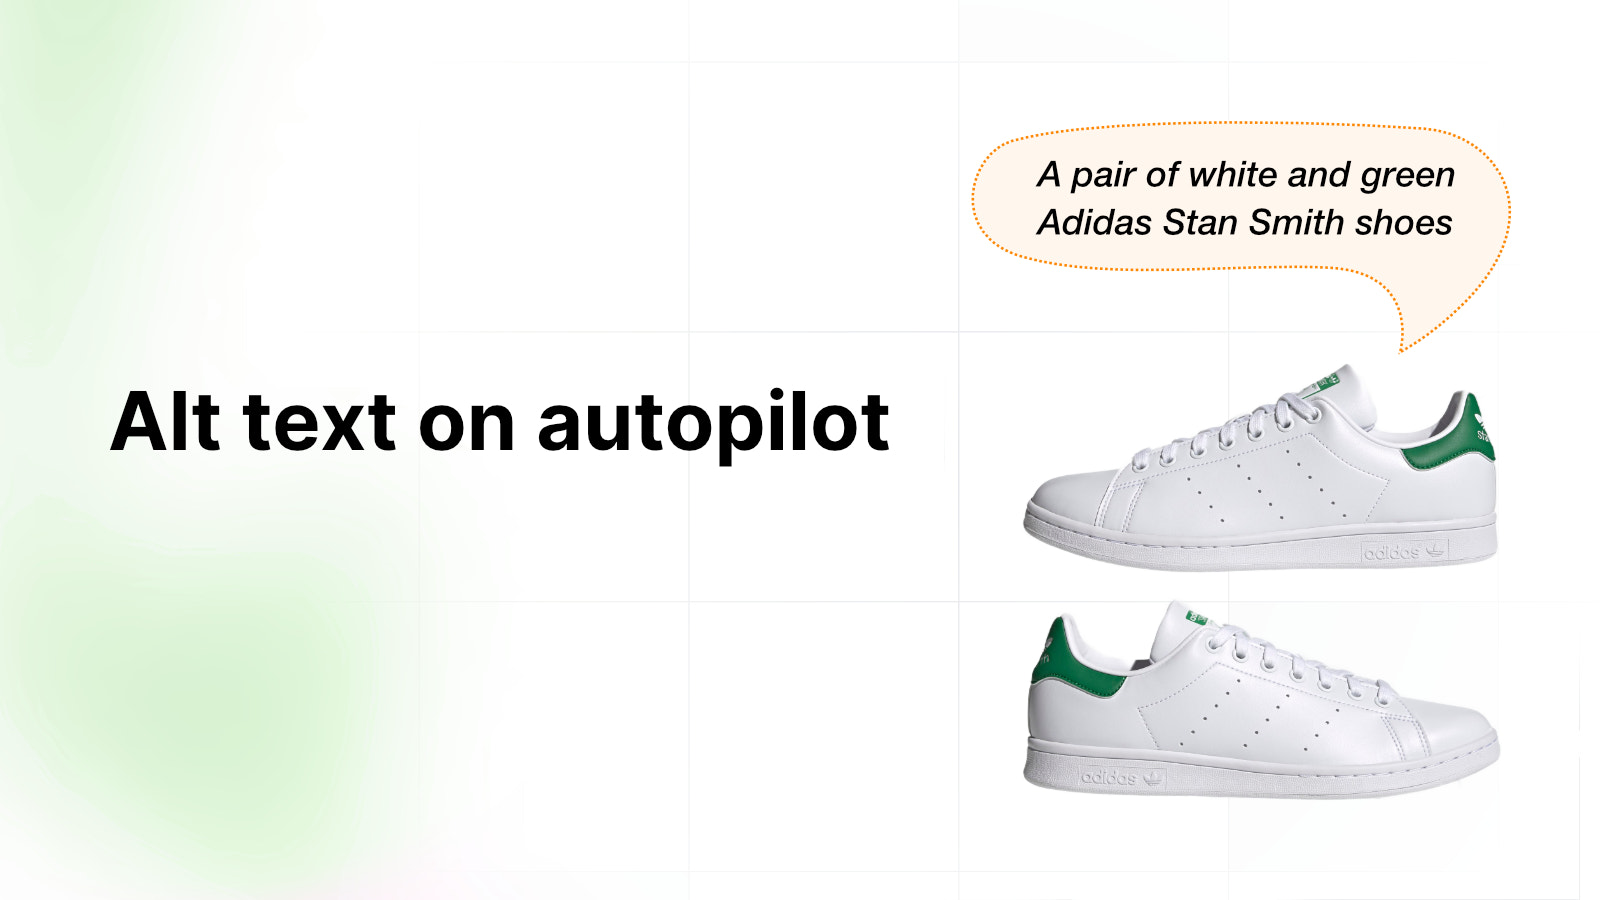 A pair of white and green shoes